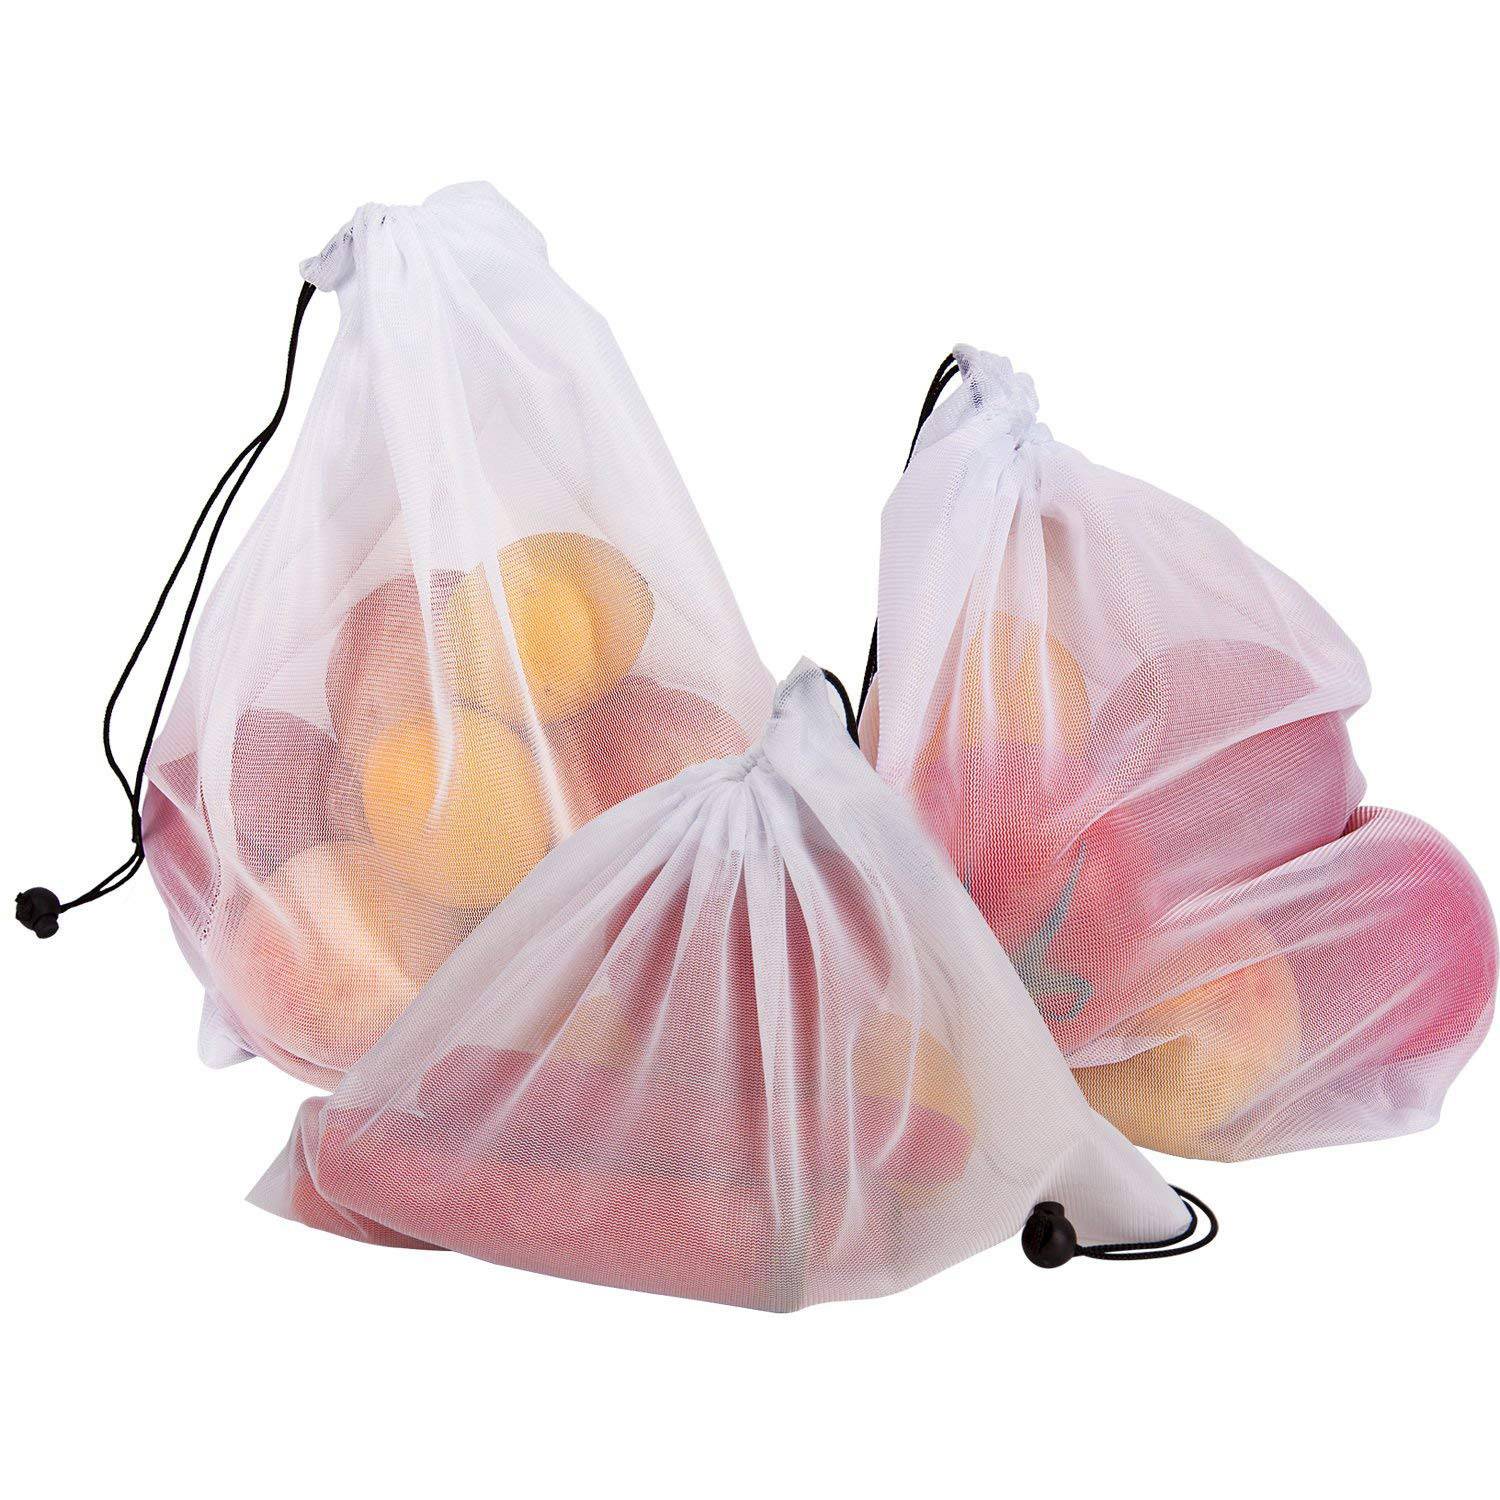 Reusable Mesh Produce Bags Double-Stitched Eco Bags Snack Bags Washable Mesh Storage Bag For Fruit Vegetables With Tare W - ebowsos